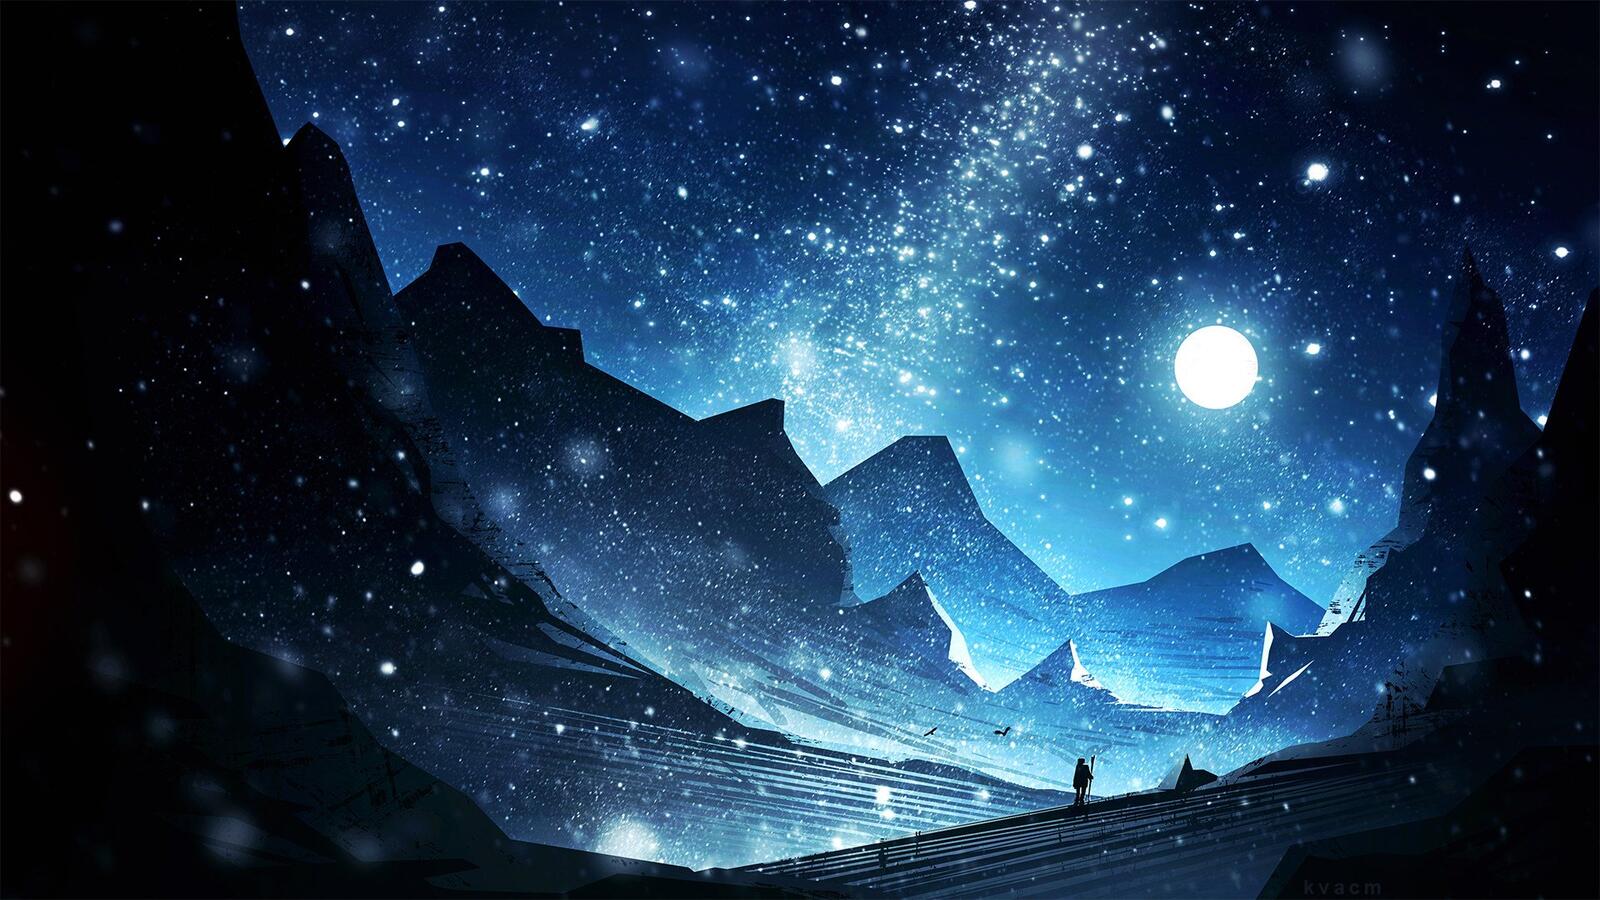 Free photo An image with magic in the mountains at night by moonlight